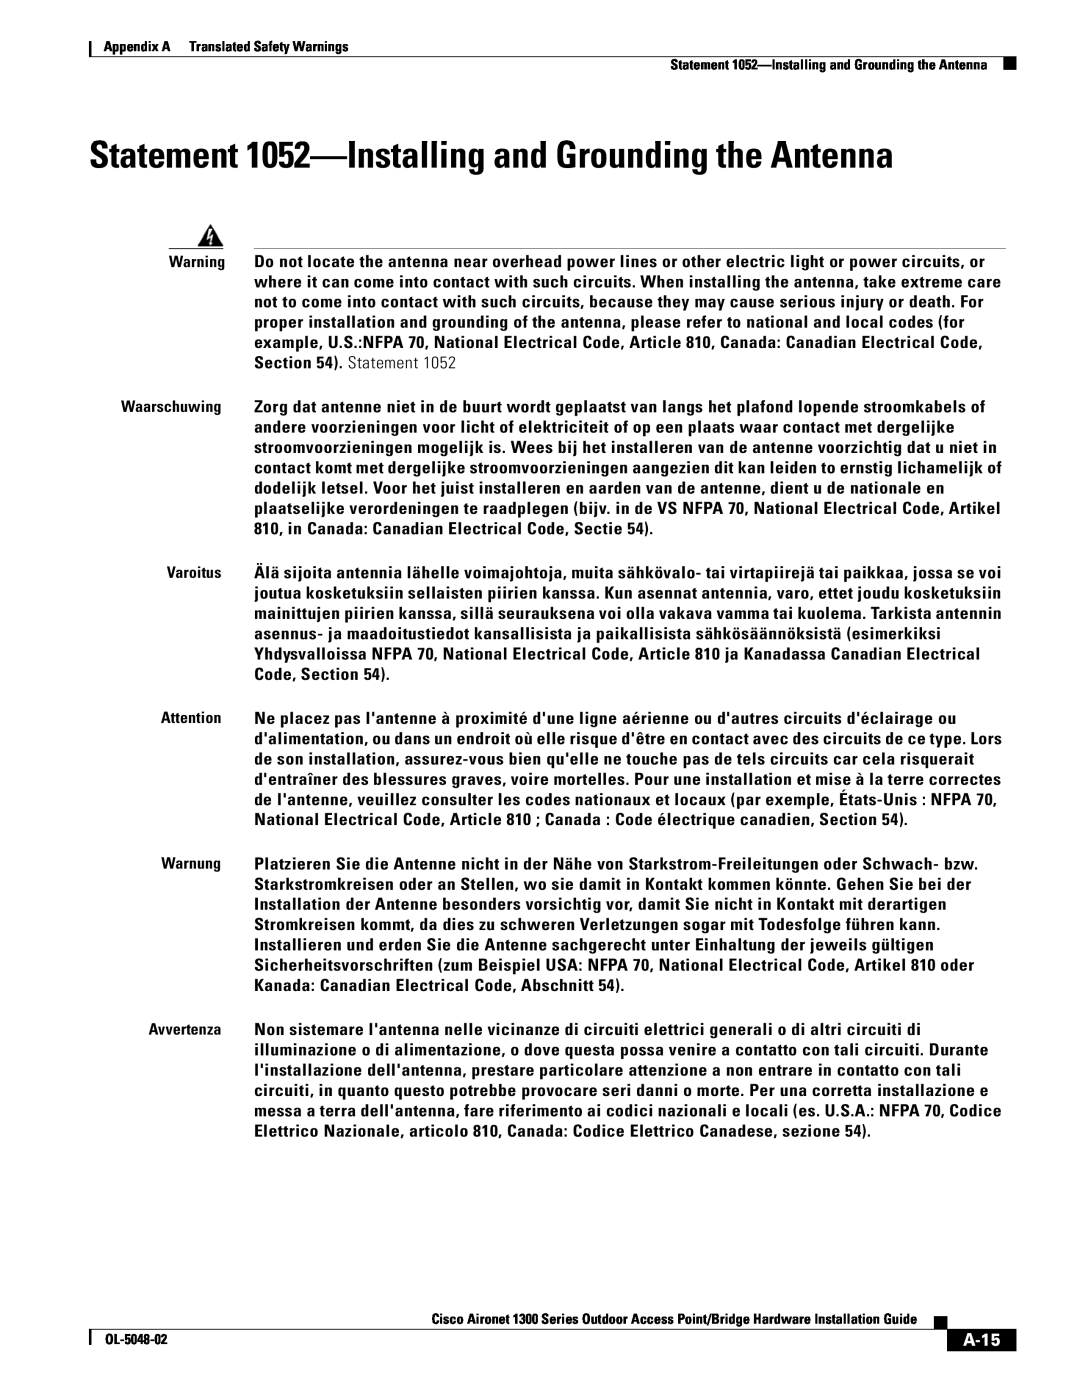 Cisco Systems 1300 Series manual Statement 1052-Installing and Grounding the Antenna, A-15 